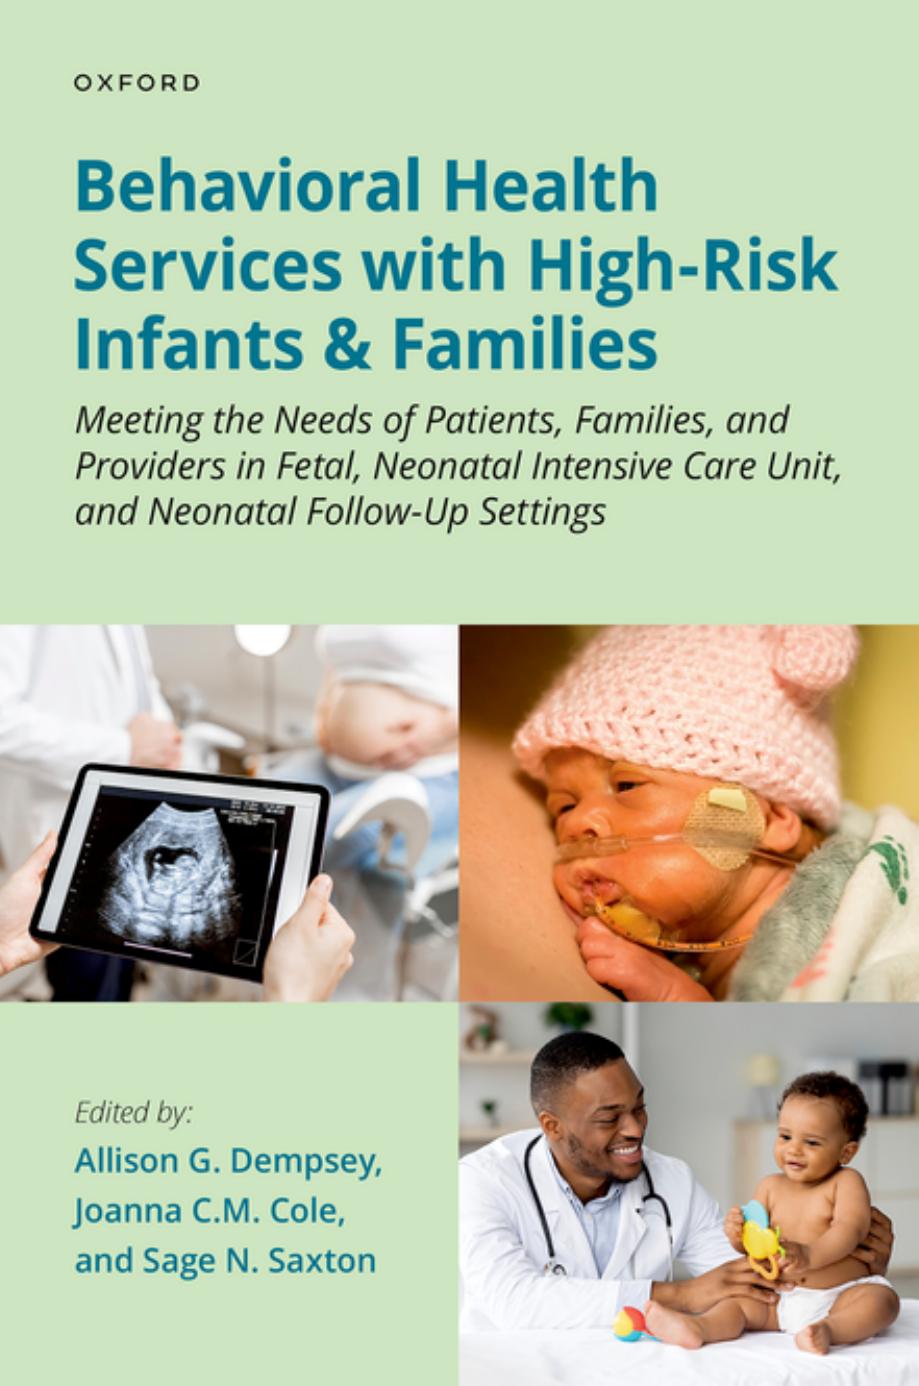 Behavioral Health Services with High-Risk Infants and Families: Meeting the Needs of Patients, Families, and Providers in Fetal, Neonatal Intensive Care Unit, and Neonatal Follow-Up Settings